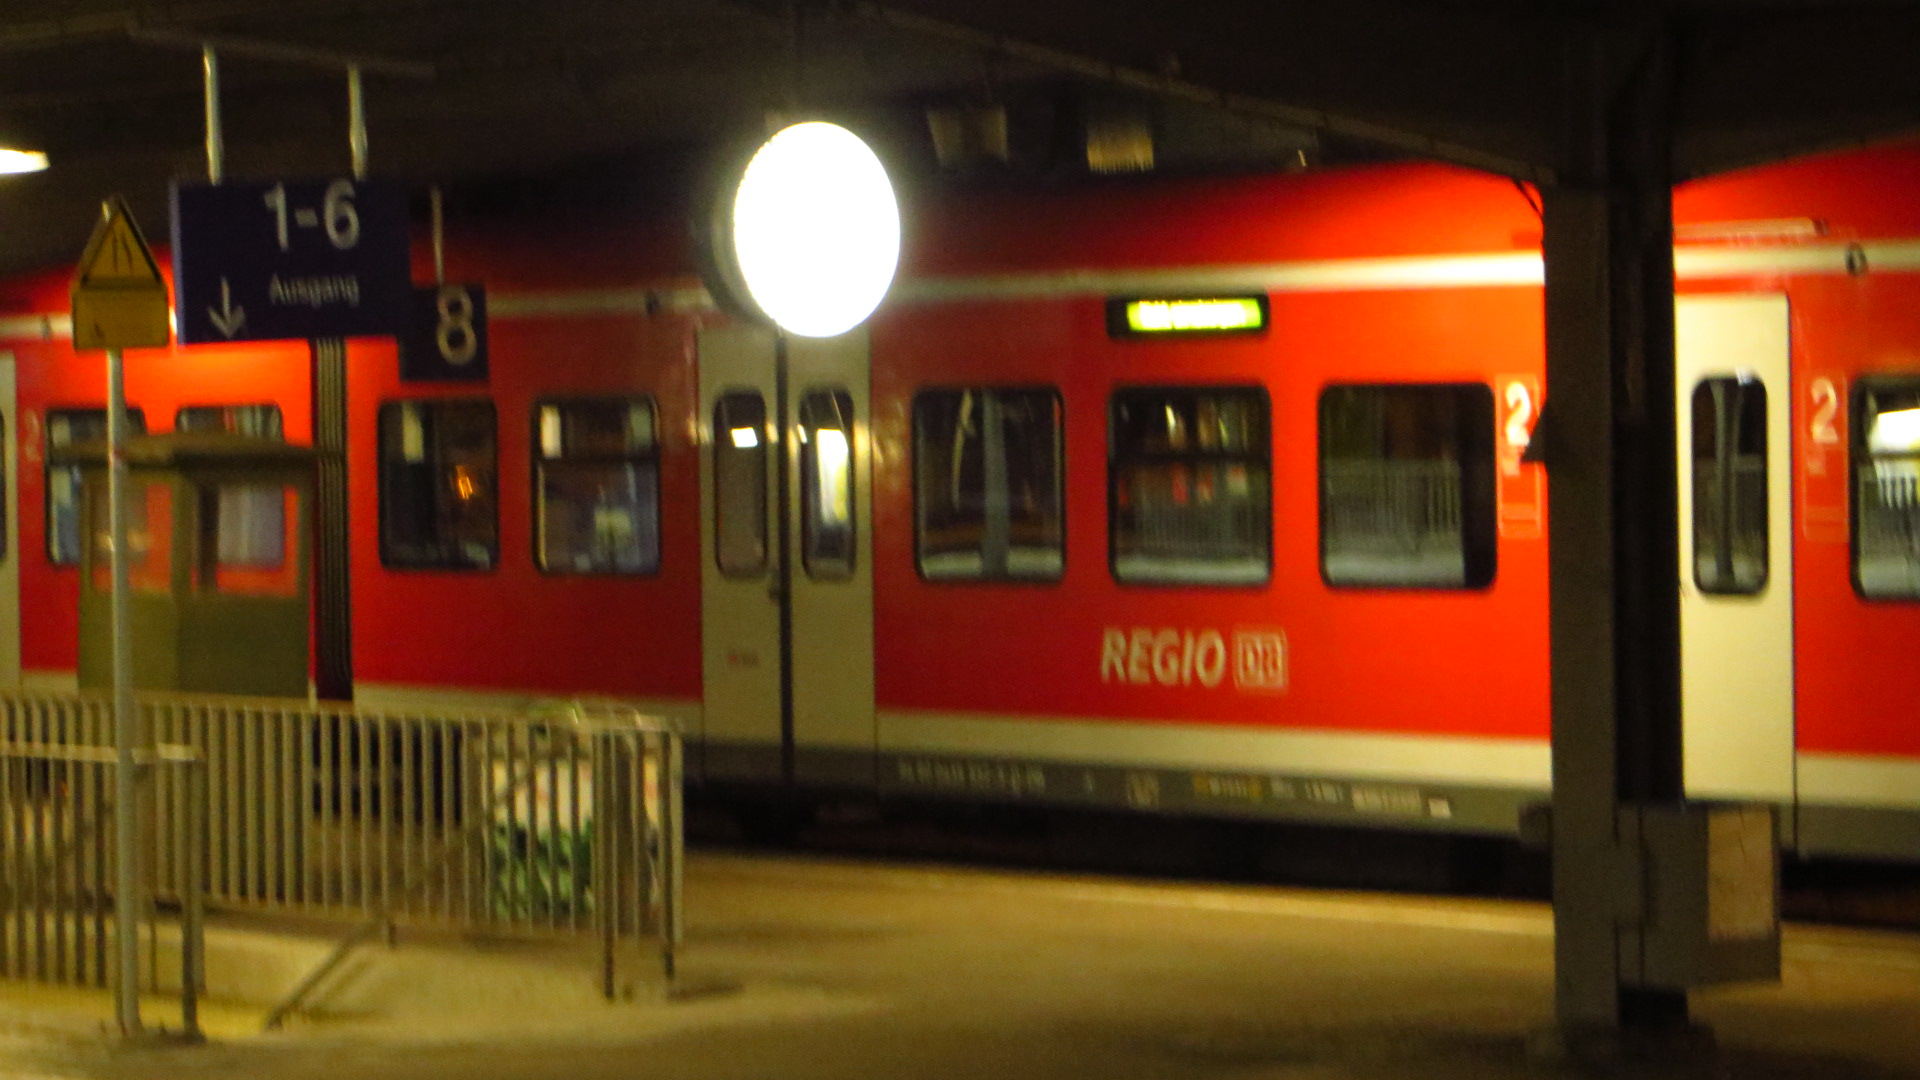 the train is at the station at night